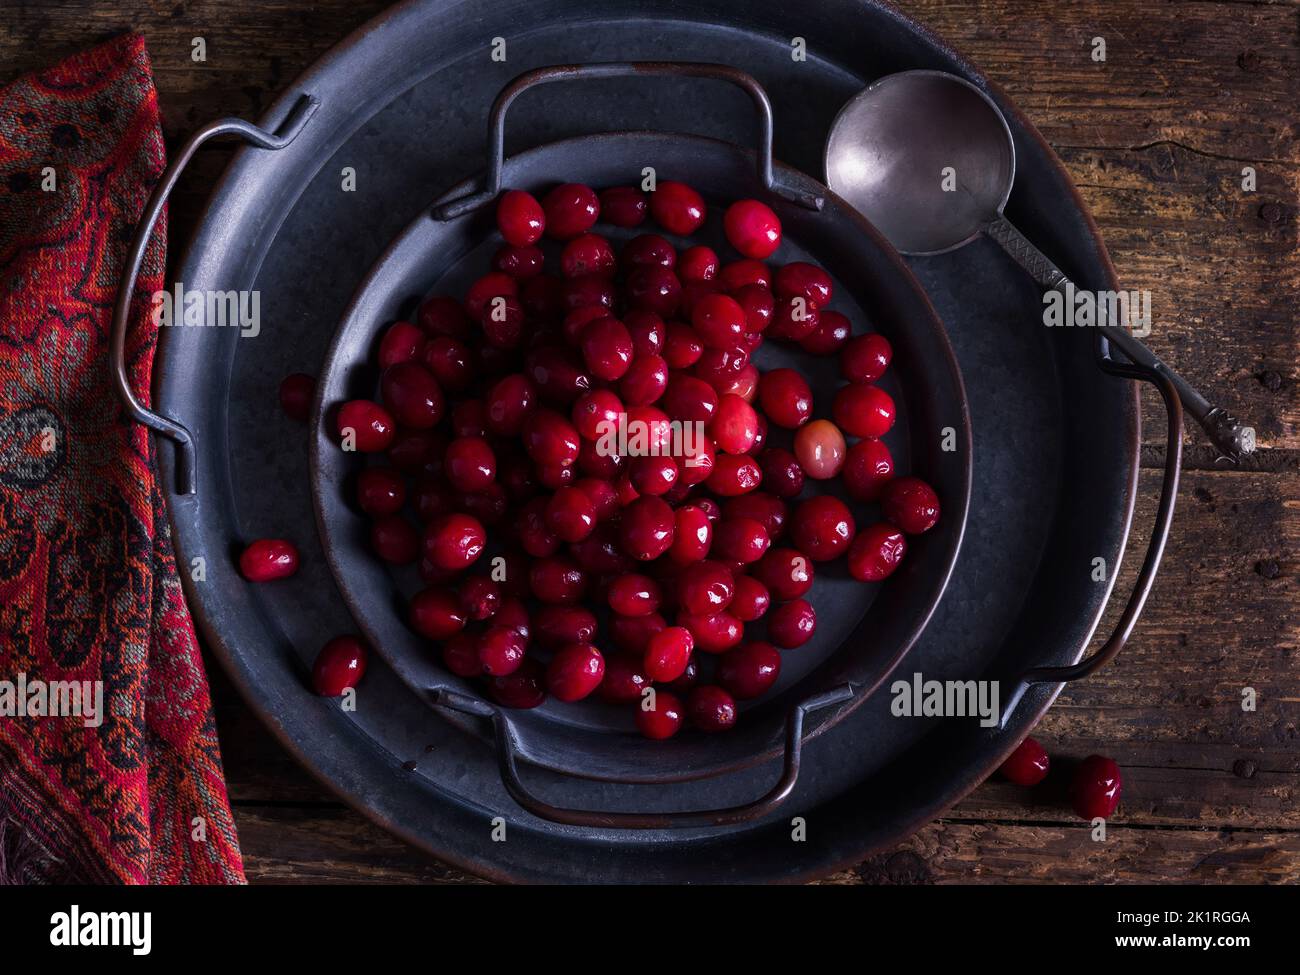 Still life with 2 rustic plates filled with fresh cranberries on an antique wooden table Stock Photo